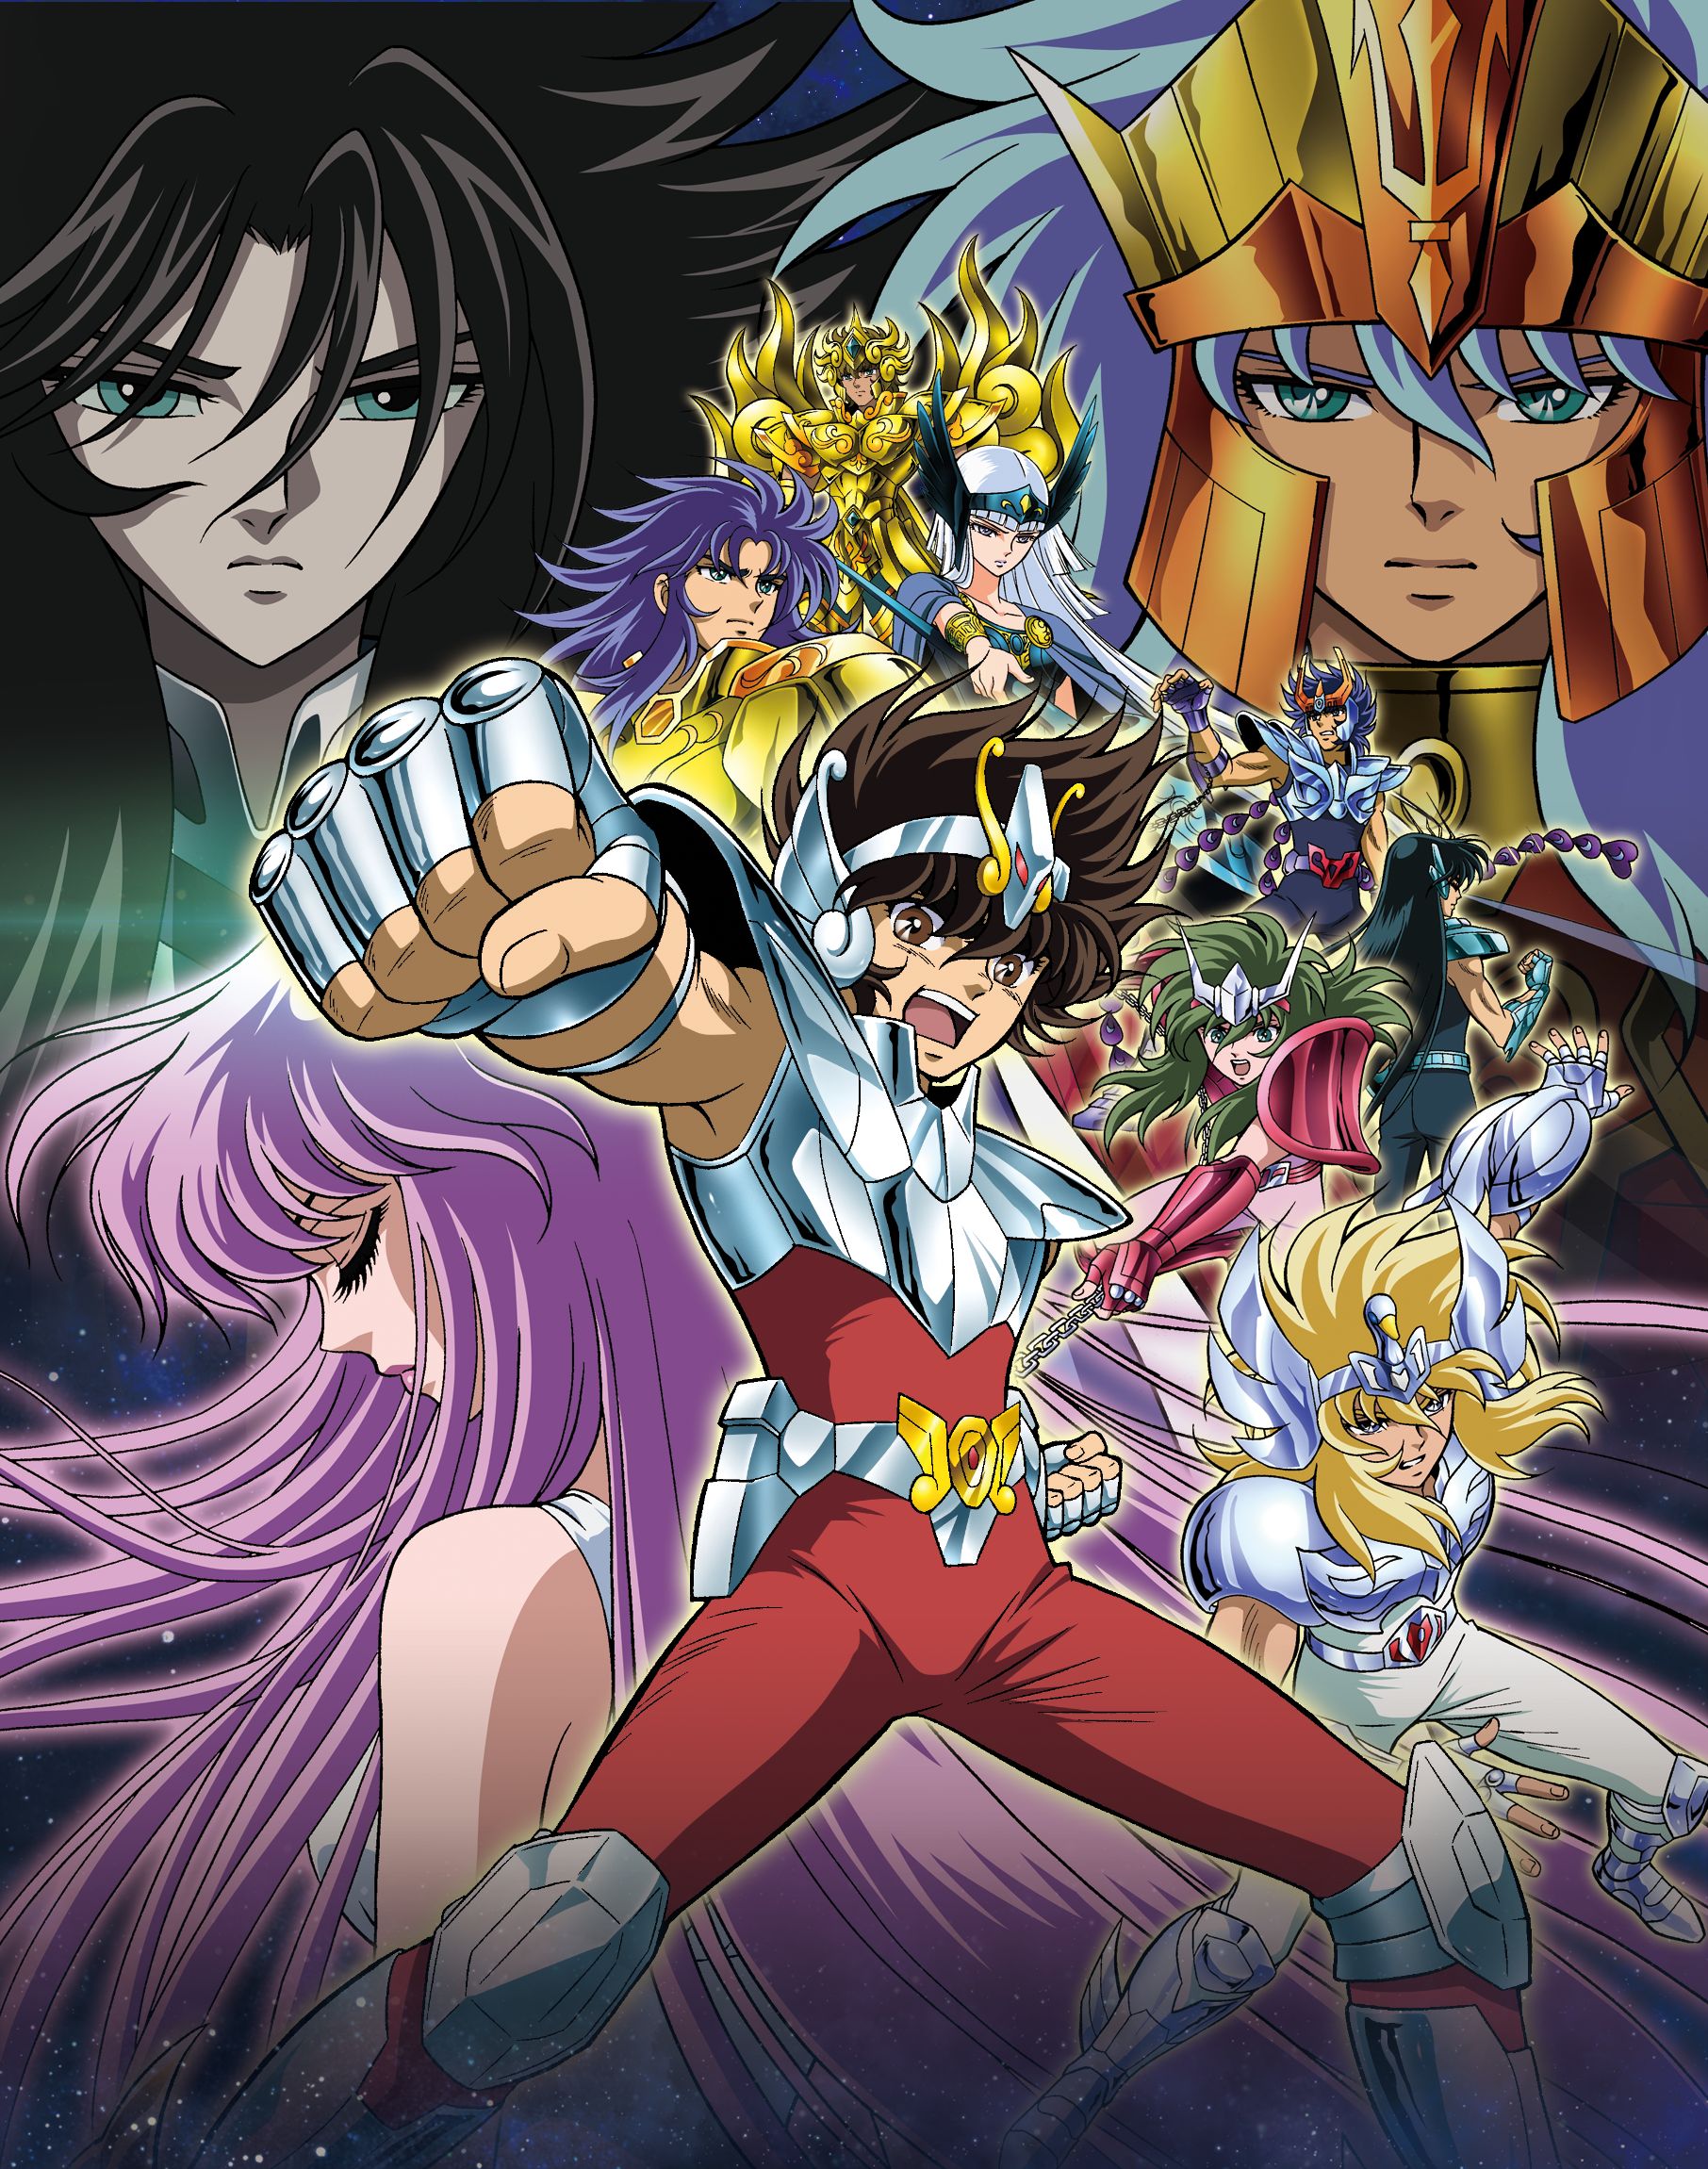 Saint Seiya: Soldier's Soul Gets A Ton Of New Screenshots And A